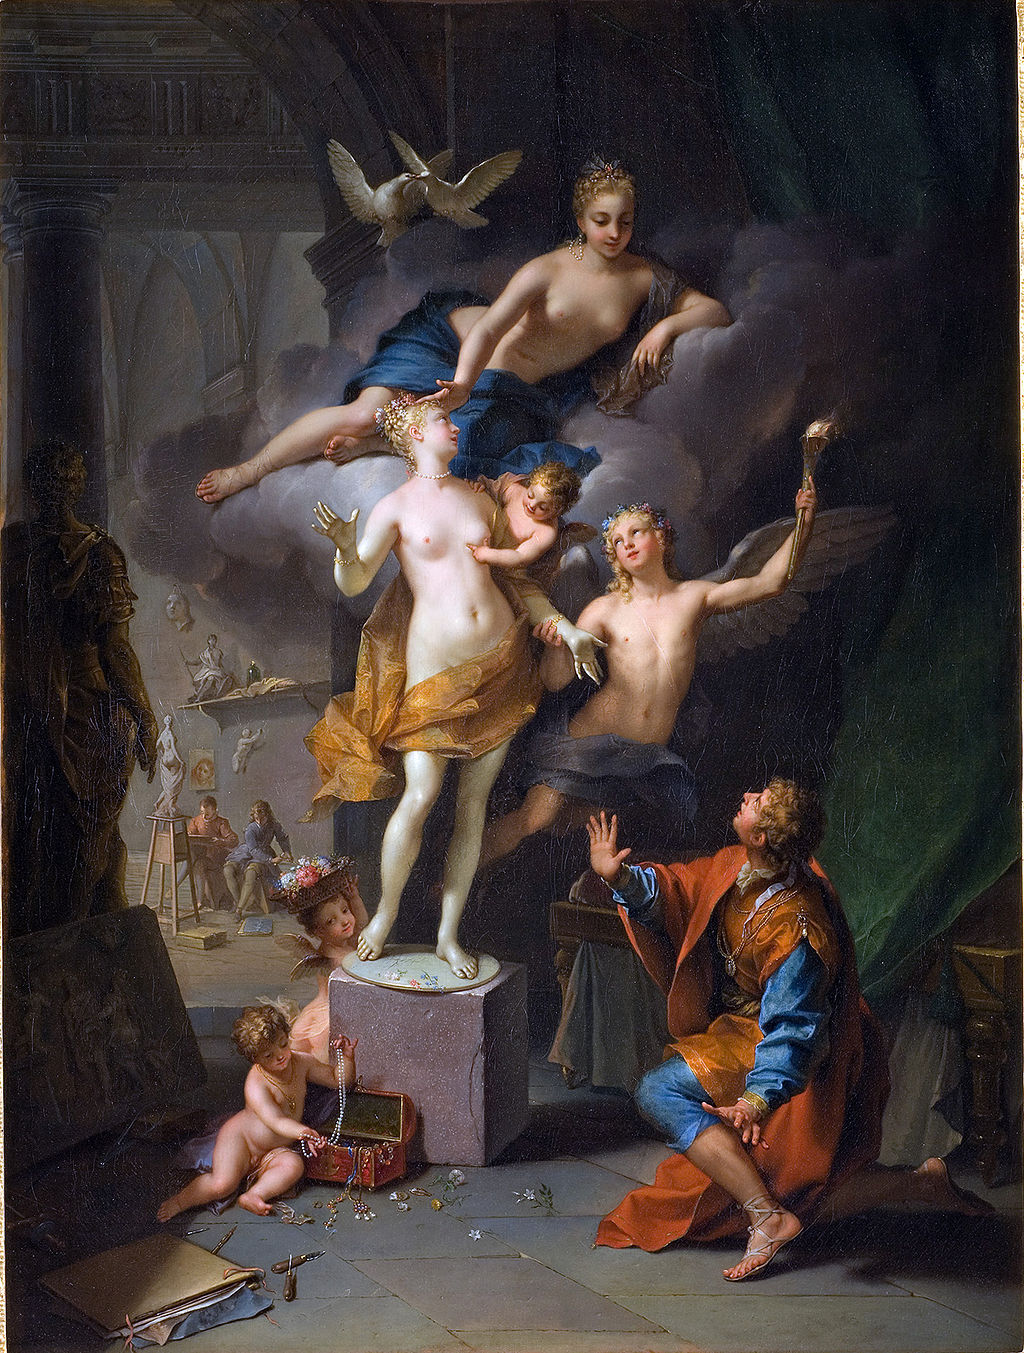 Photograph of the painting “Pygmalion Adoring His Statue” by Jean Raoux (1717).